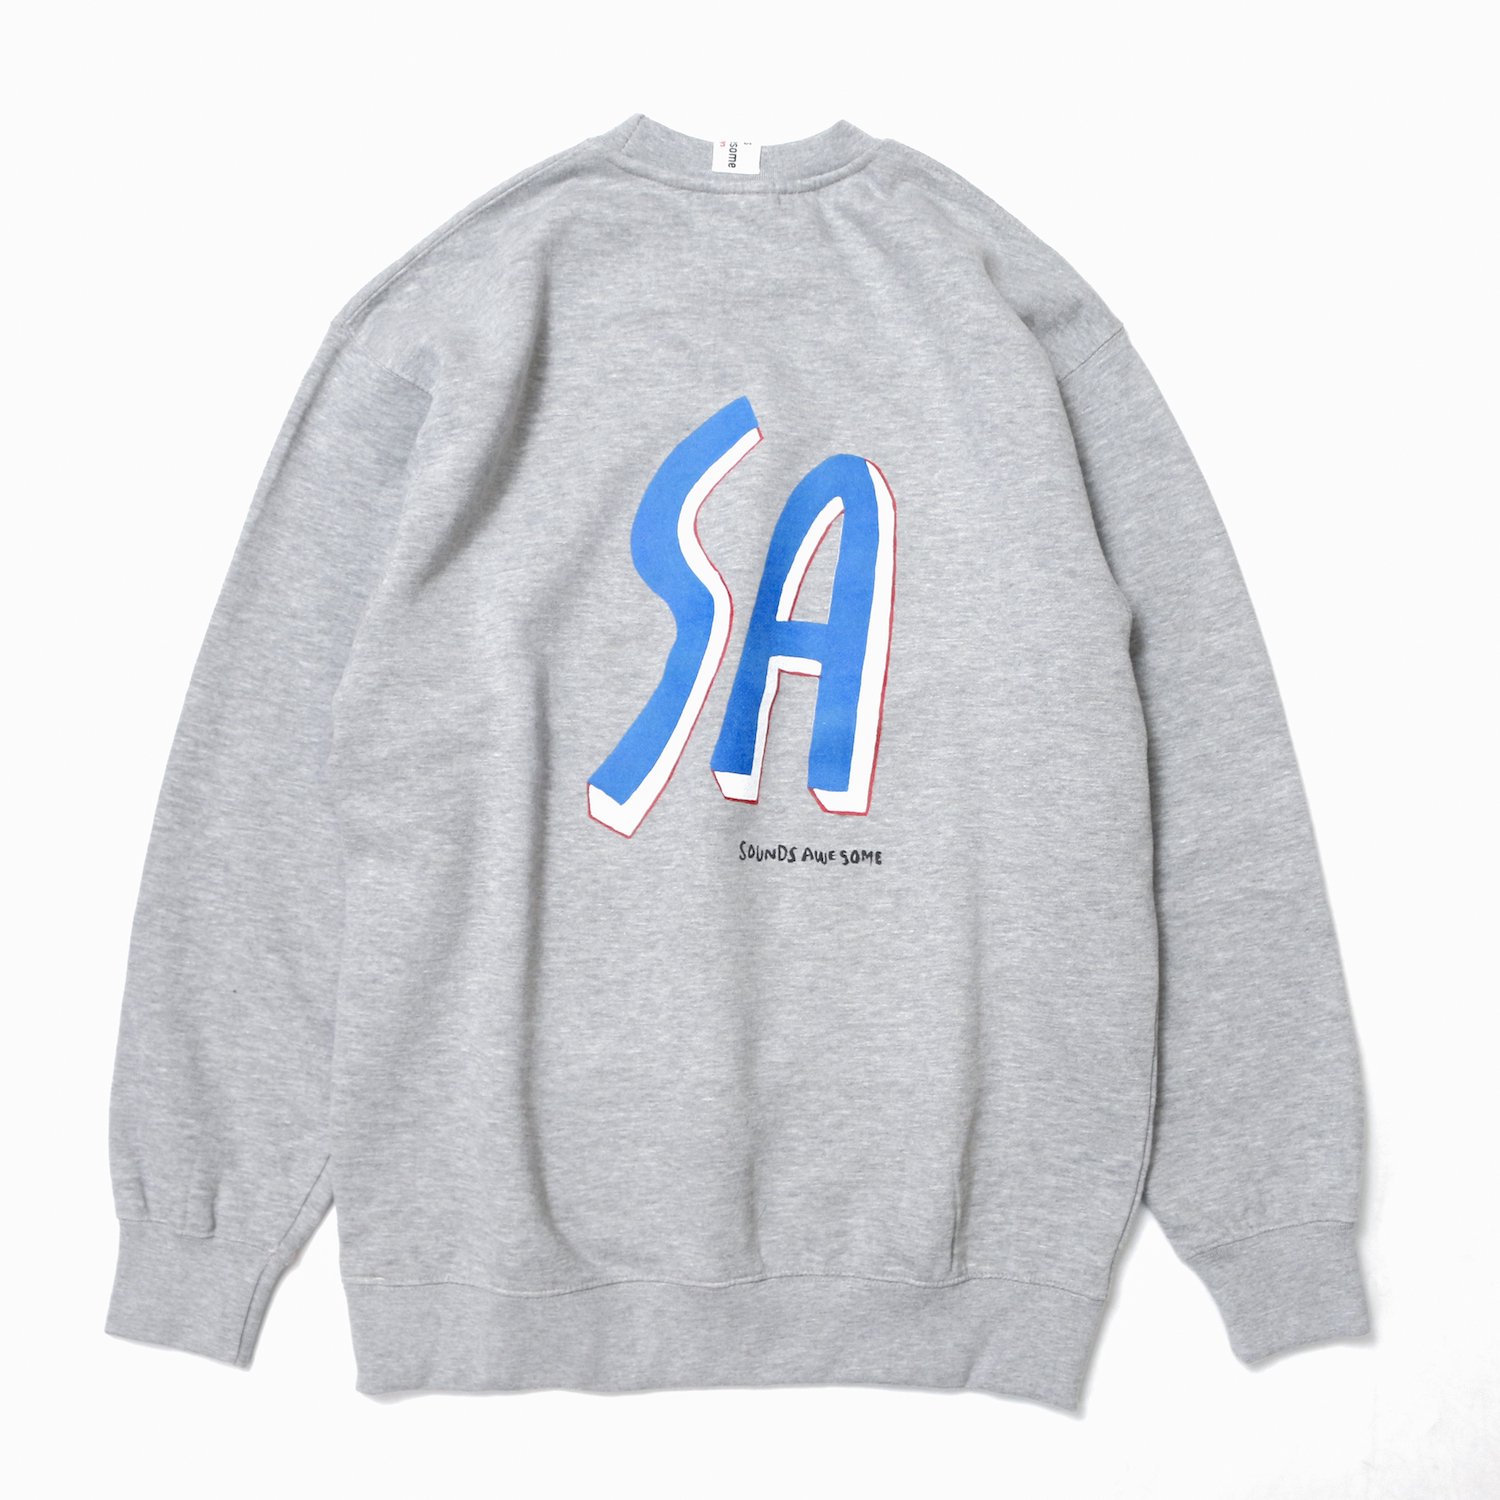 <img class='new_mark_img1' src='https://img.shop-pro.jp/img/new/icons8.gif' style='border:none;display:inline;margin:0px;padding:0px;width:auto;' />SOUNDS AWESOME / SA Logo printed Sweat